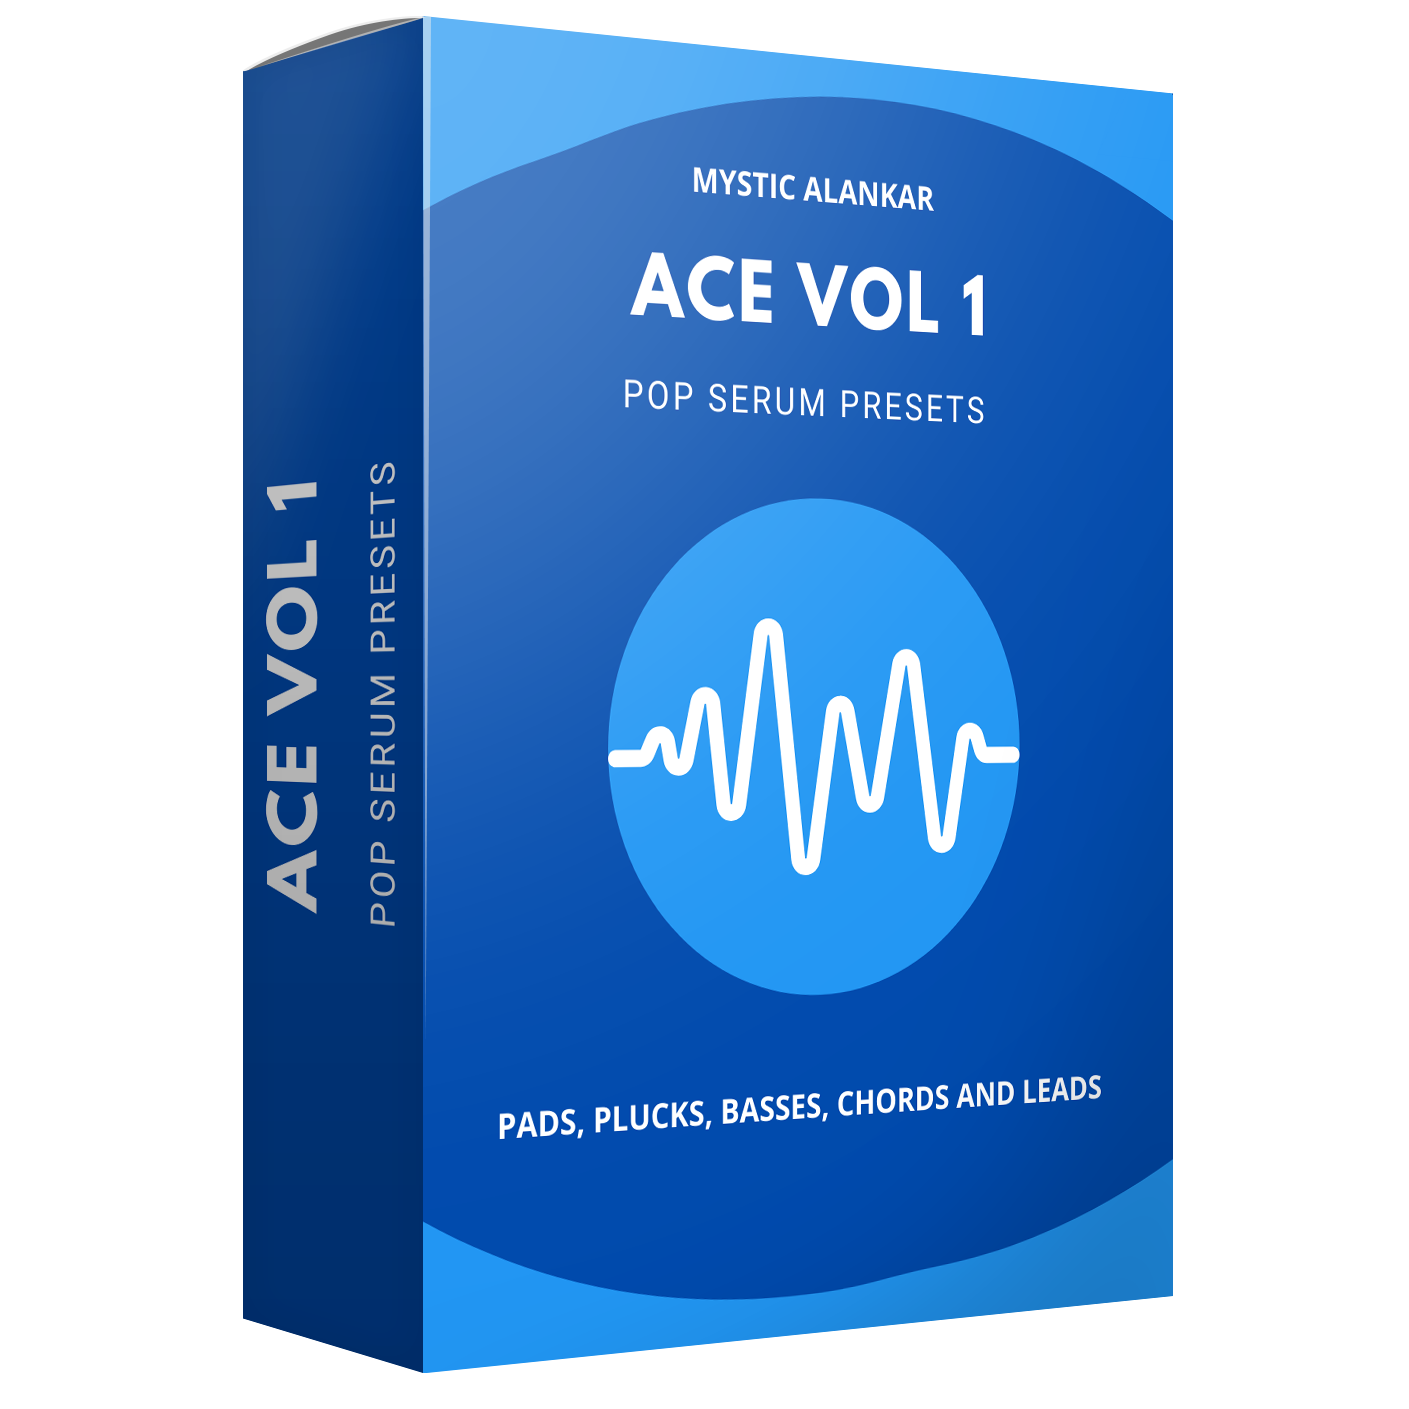 Xfer Serum presets for pop music producers